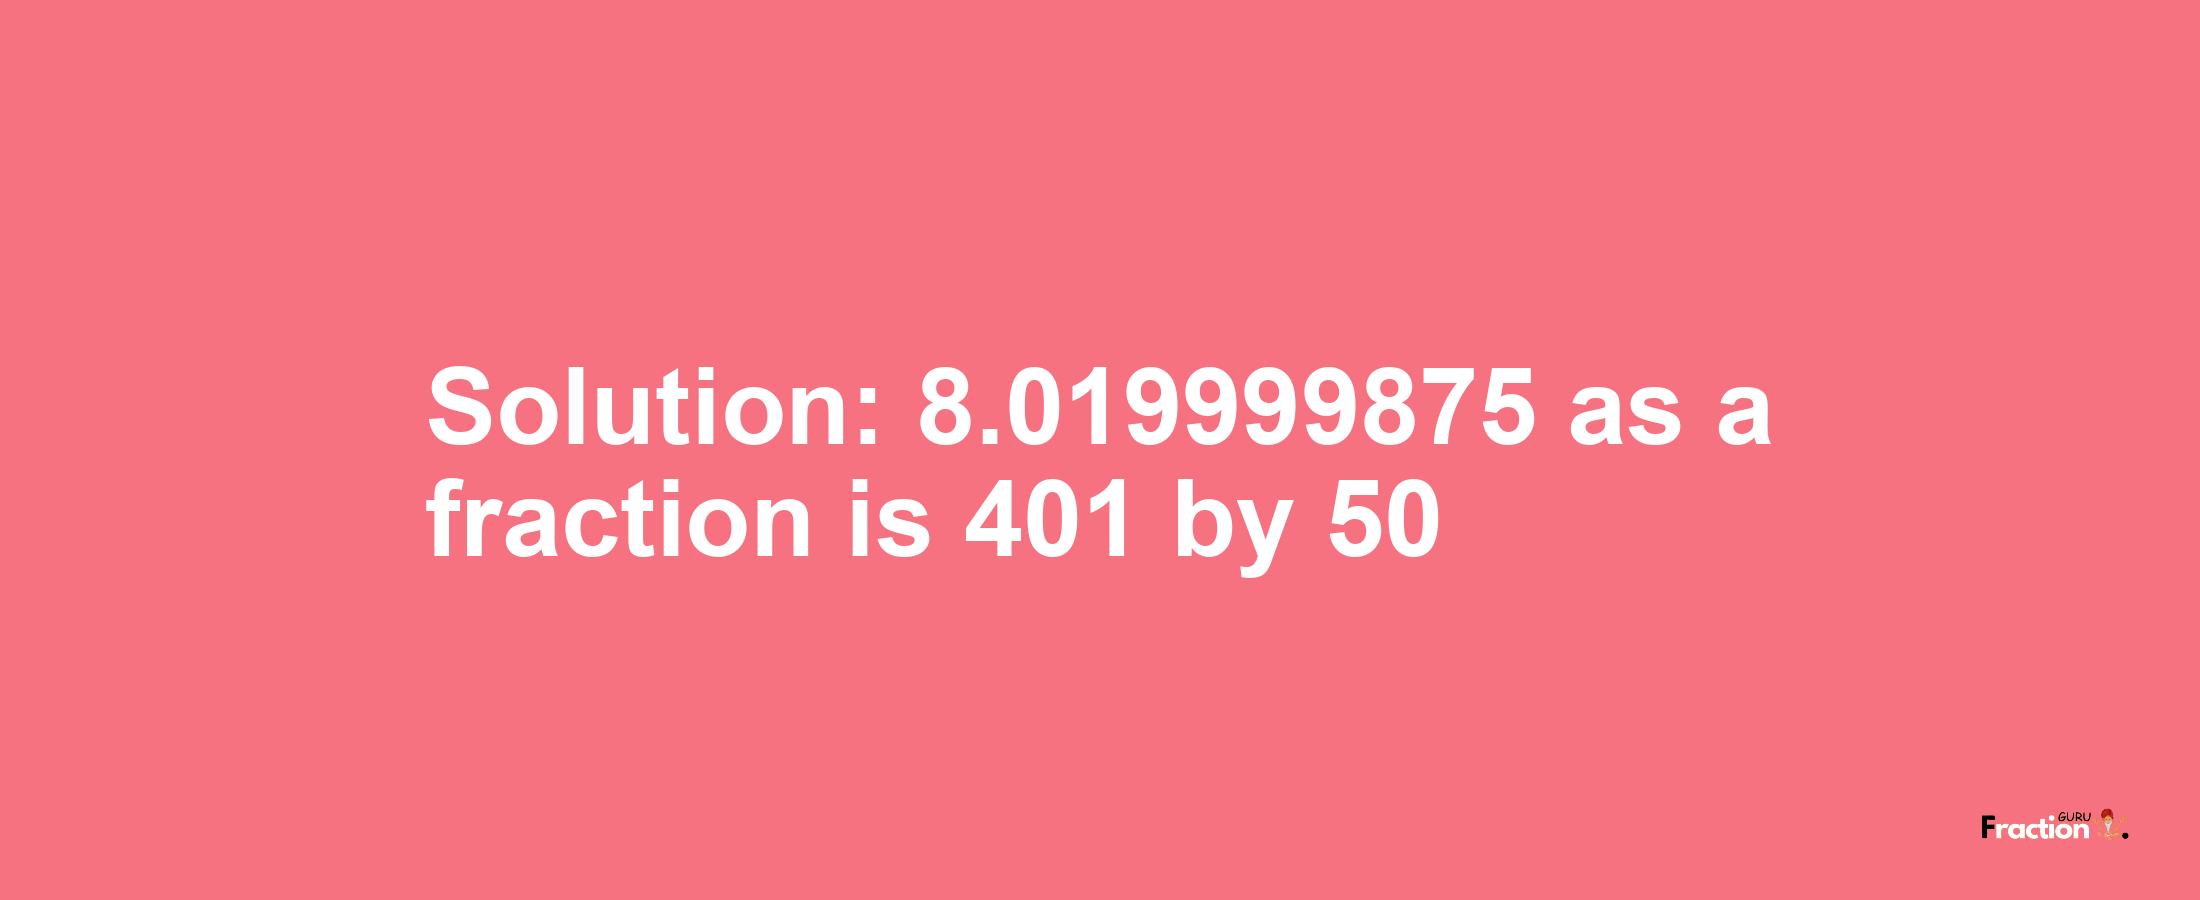 Solution:8.019999875 as a fraction is 401/50